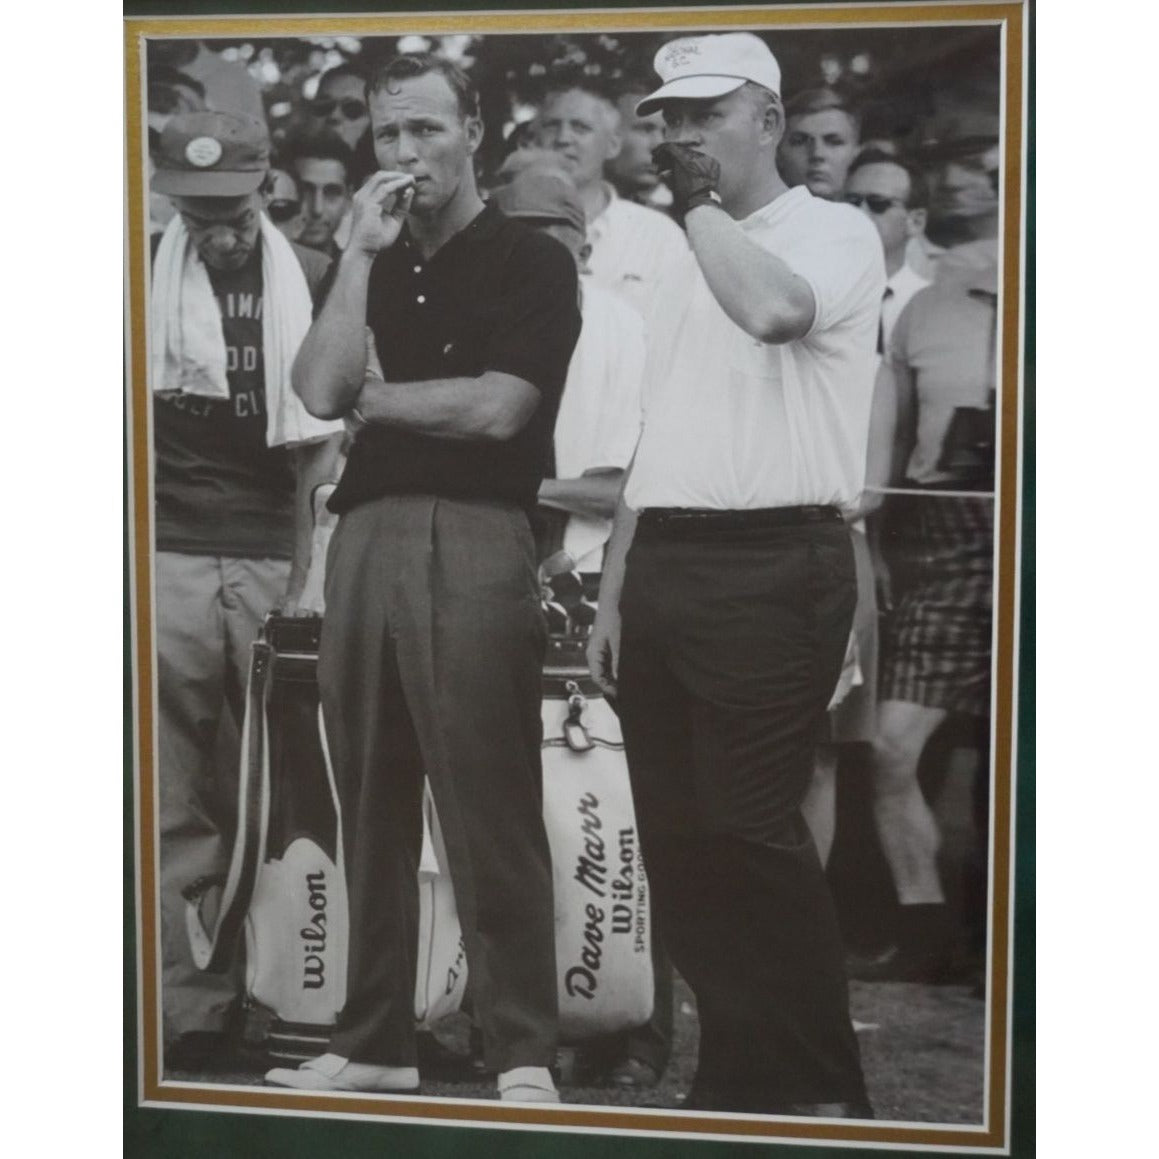 Jack Nicklaus and Arnold Palmer Masters golf balls framed 21x14 and signed with proof